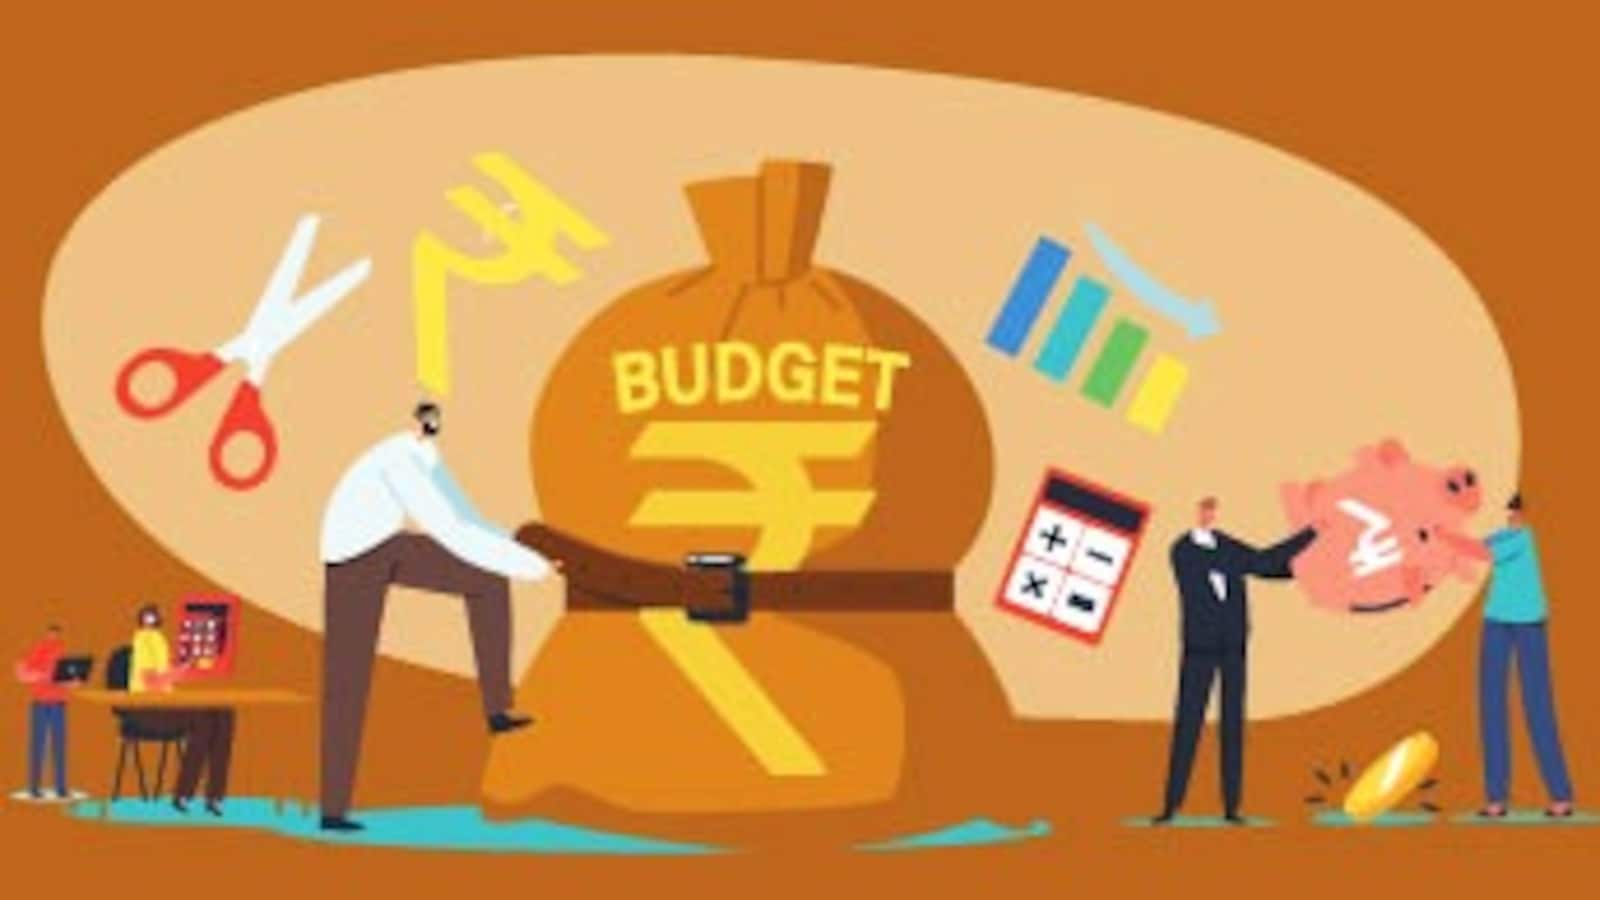 Budget 2023: A breakdown of key numbers projected for next fiscal